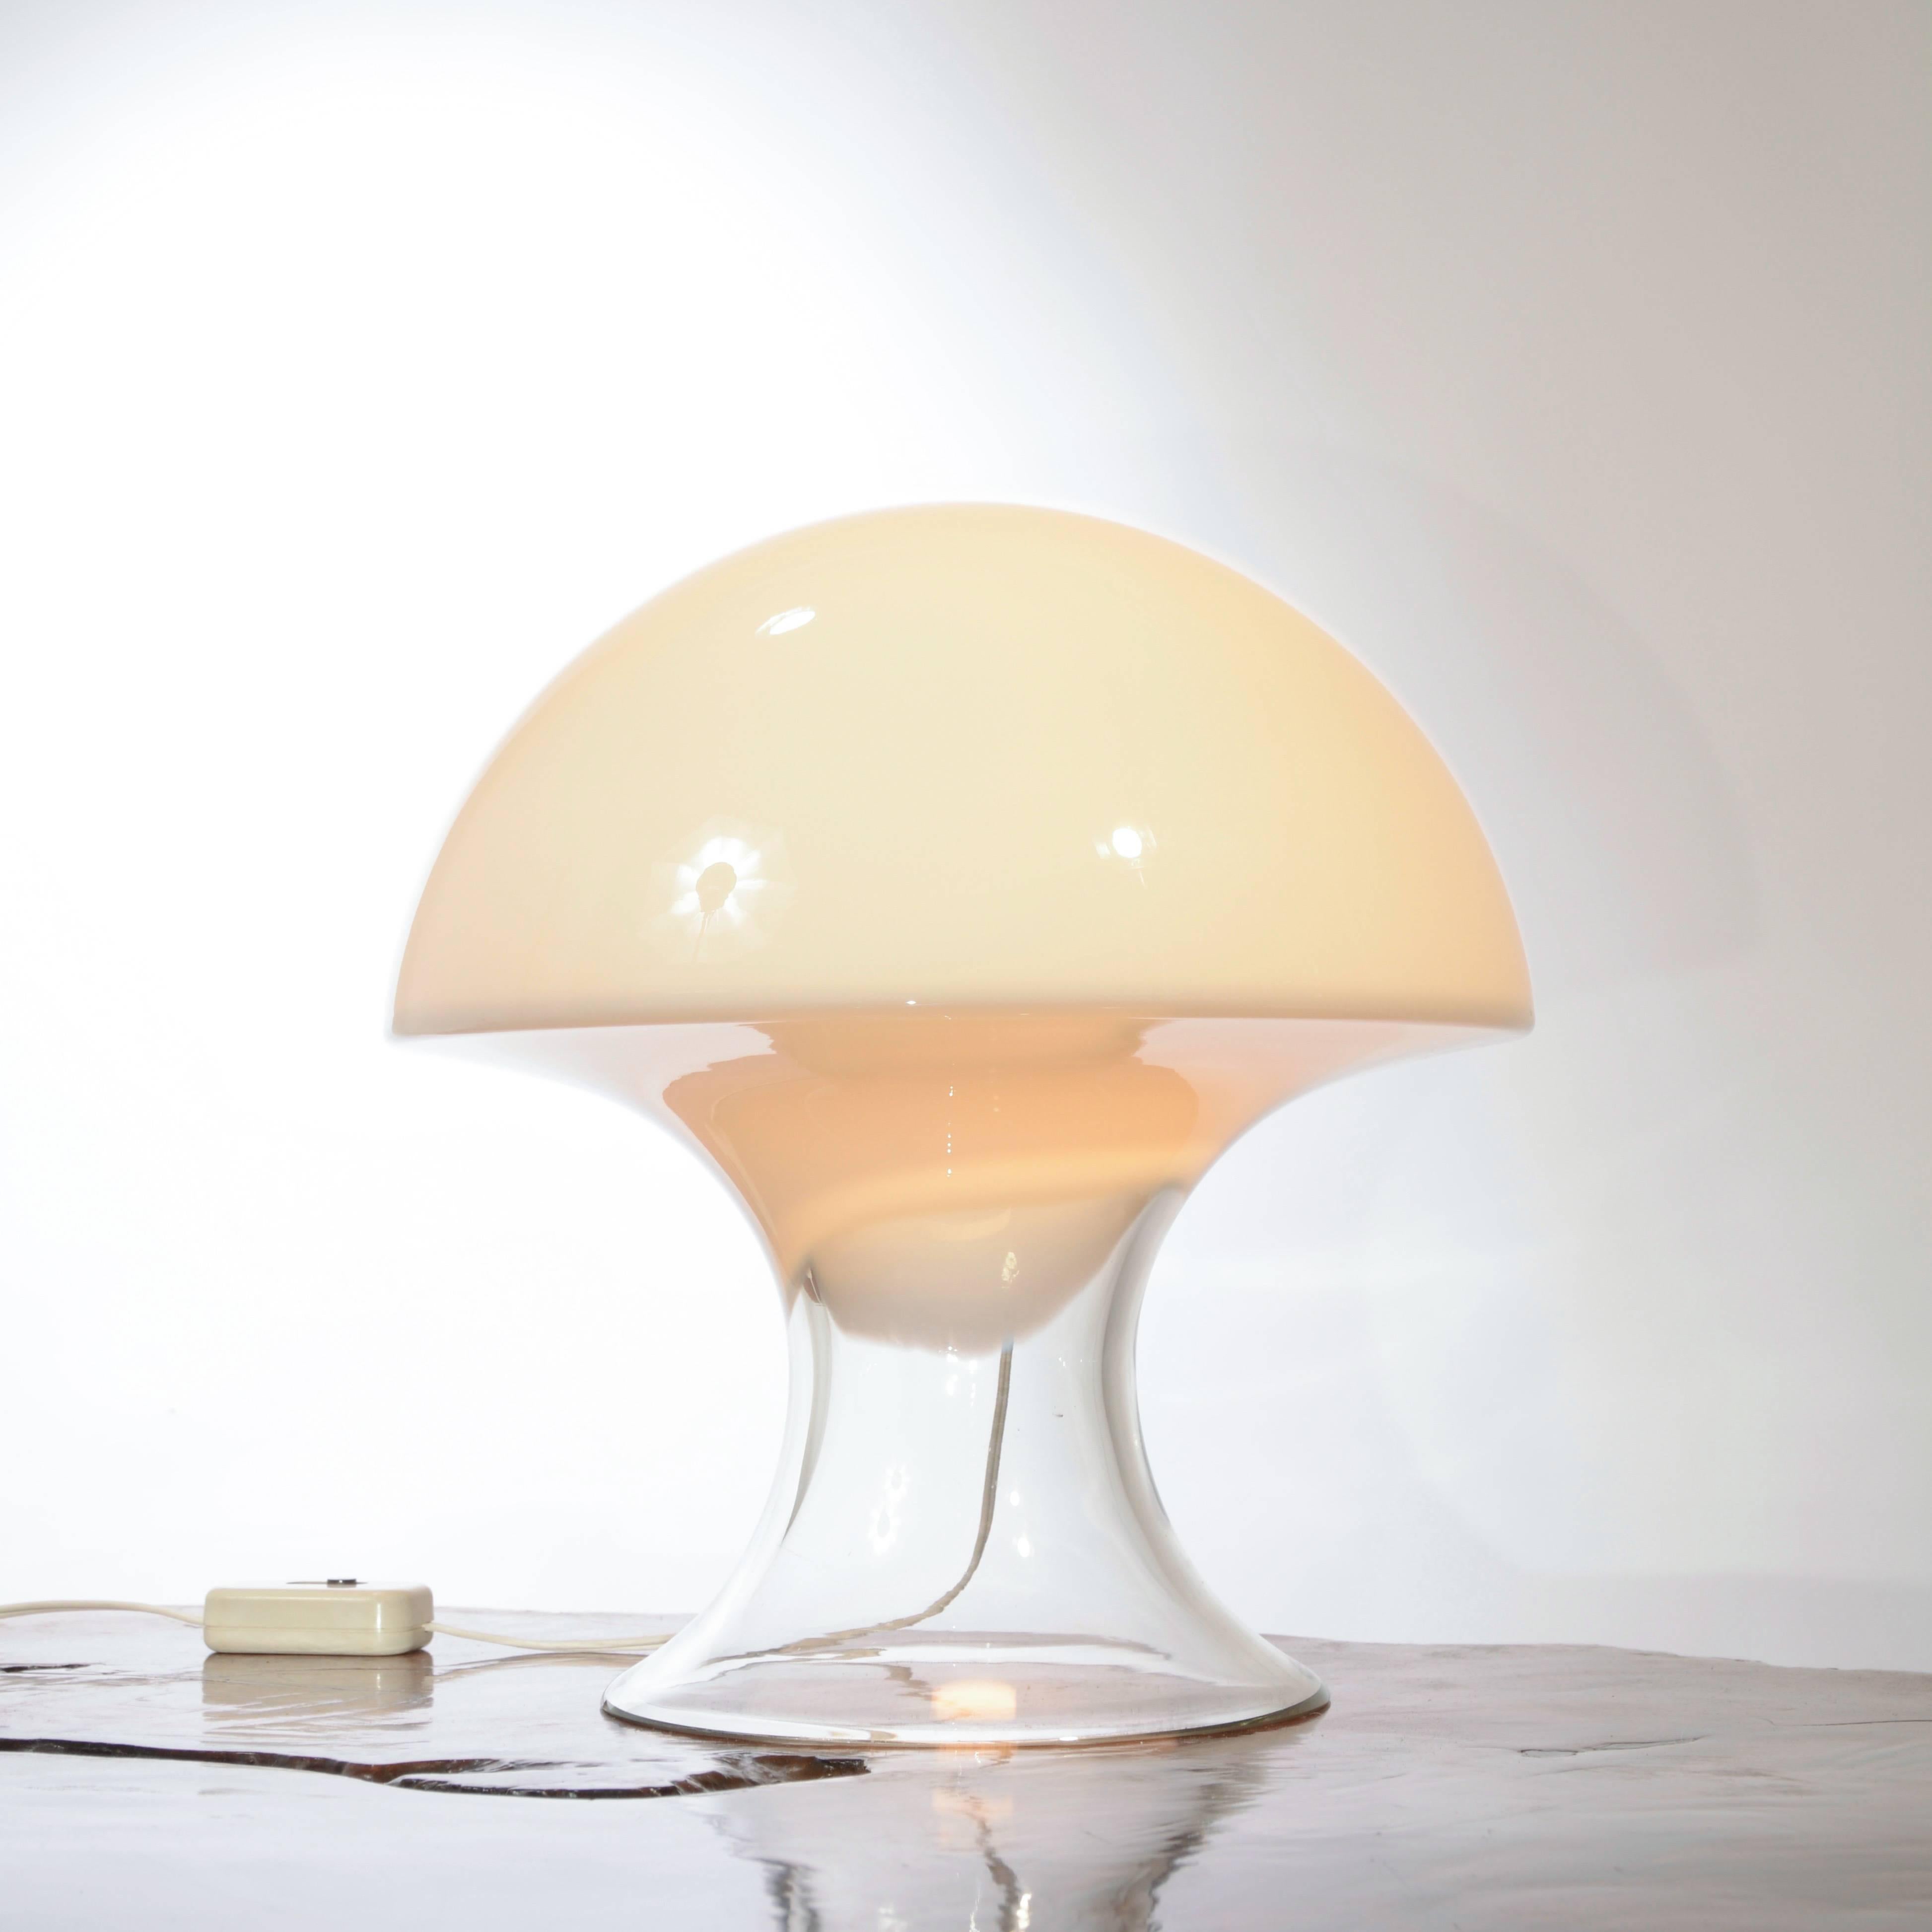 Mushroom-form table lamp with clear and white glass. Illuminated by a single bulb; switch on the cord. This item is in our Los Angeles showroom.